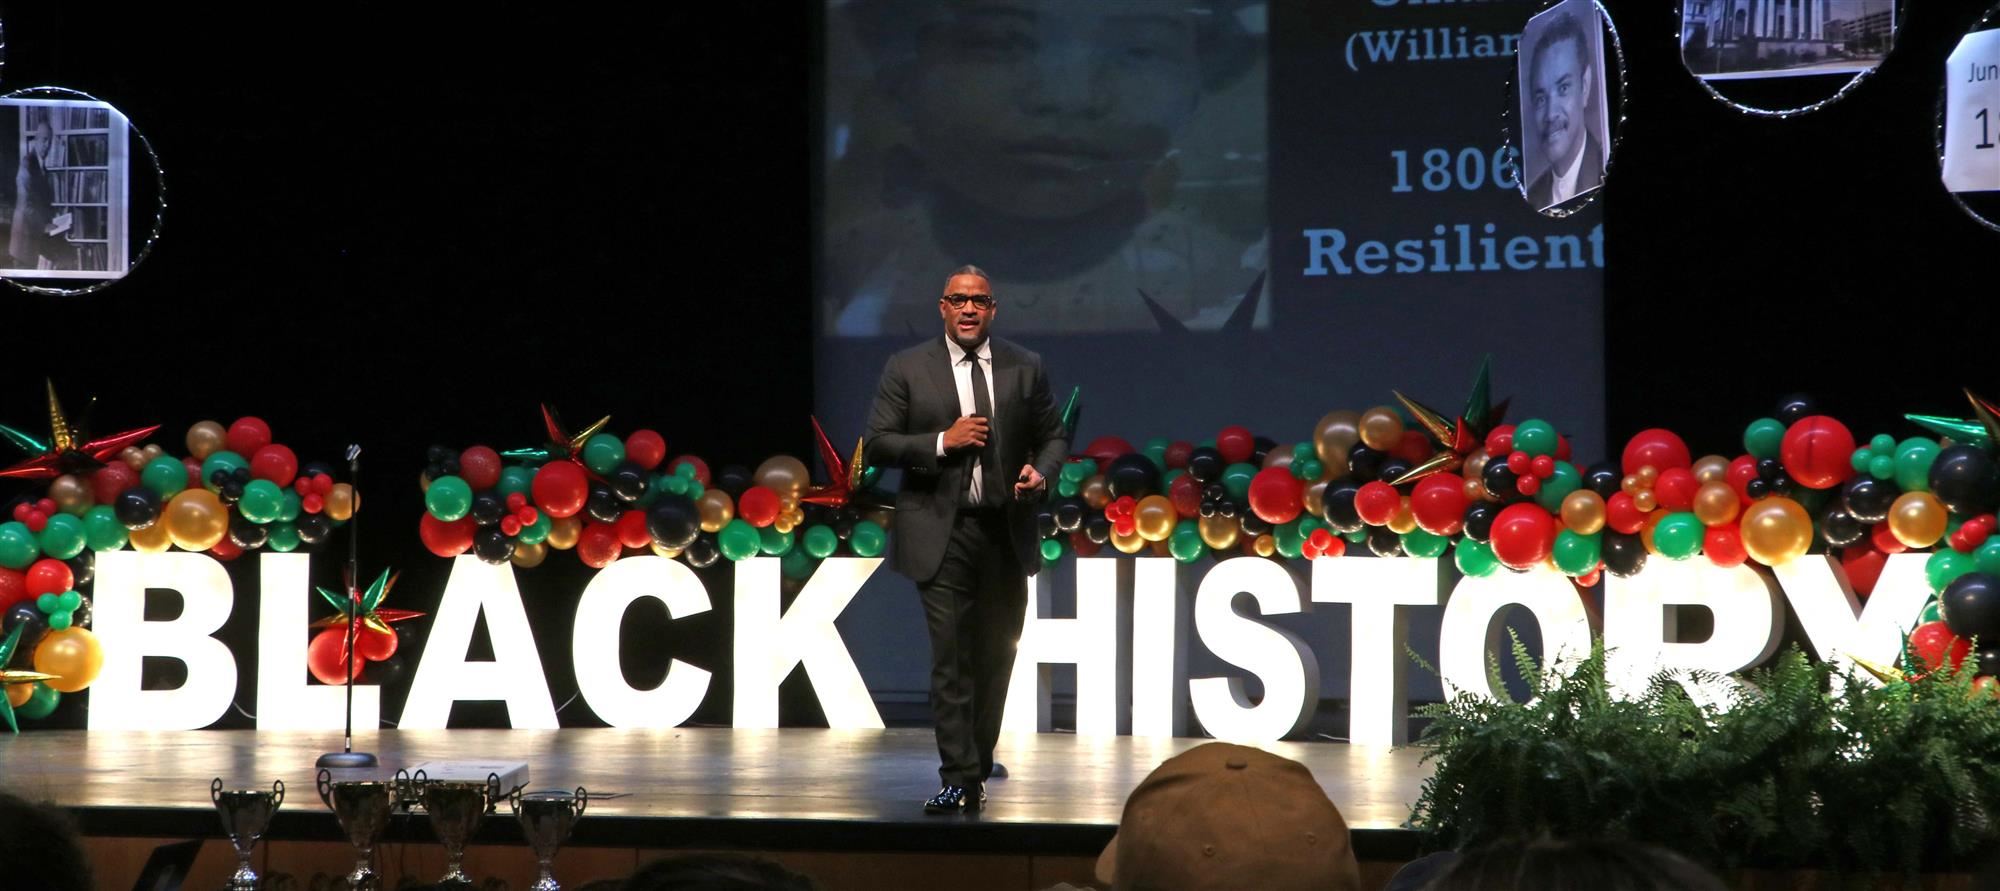 Dr. McFarland on stage of Black History Bowl